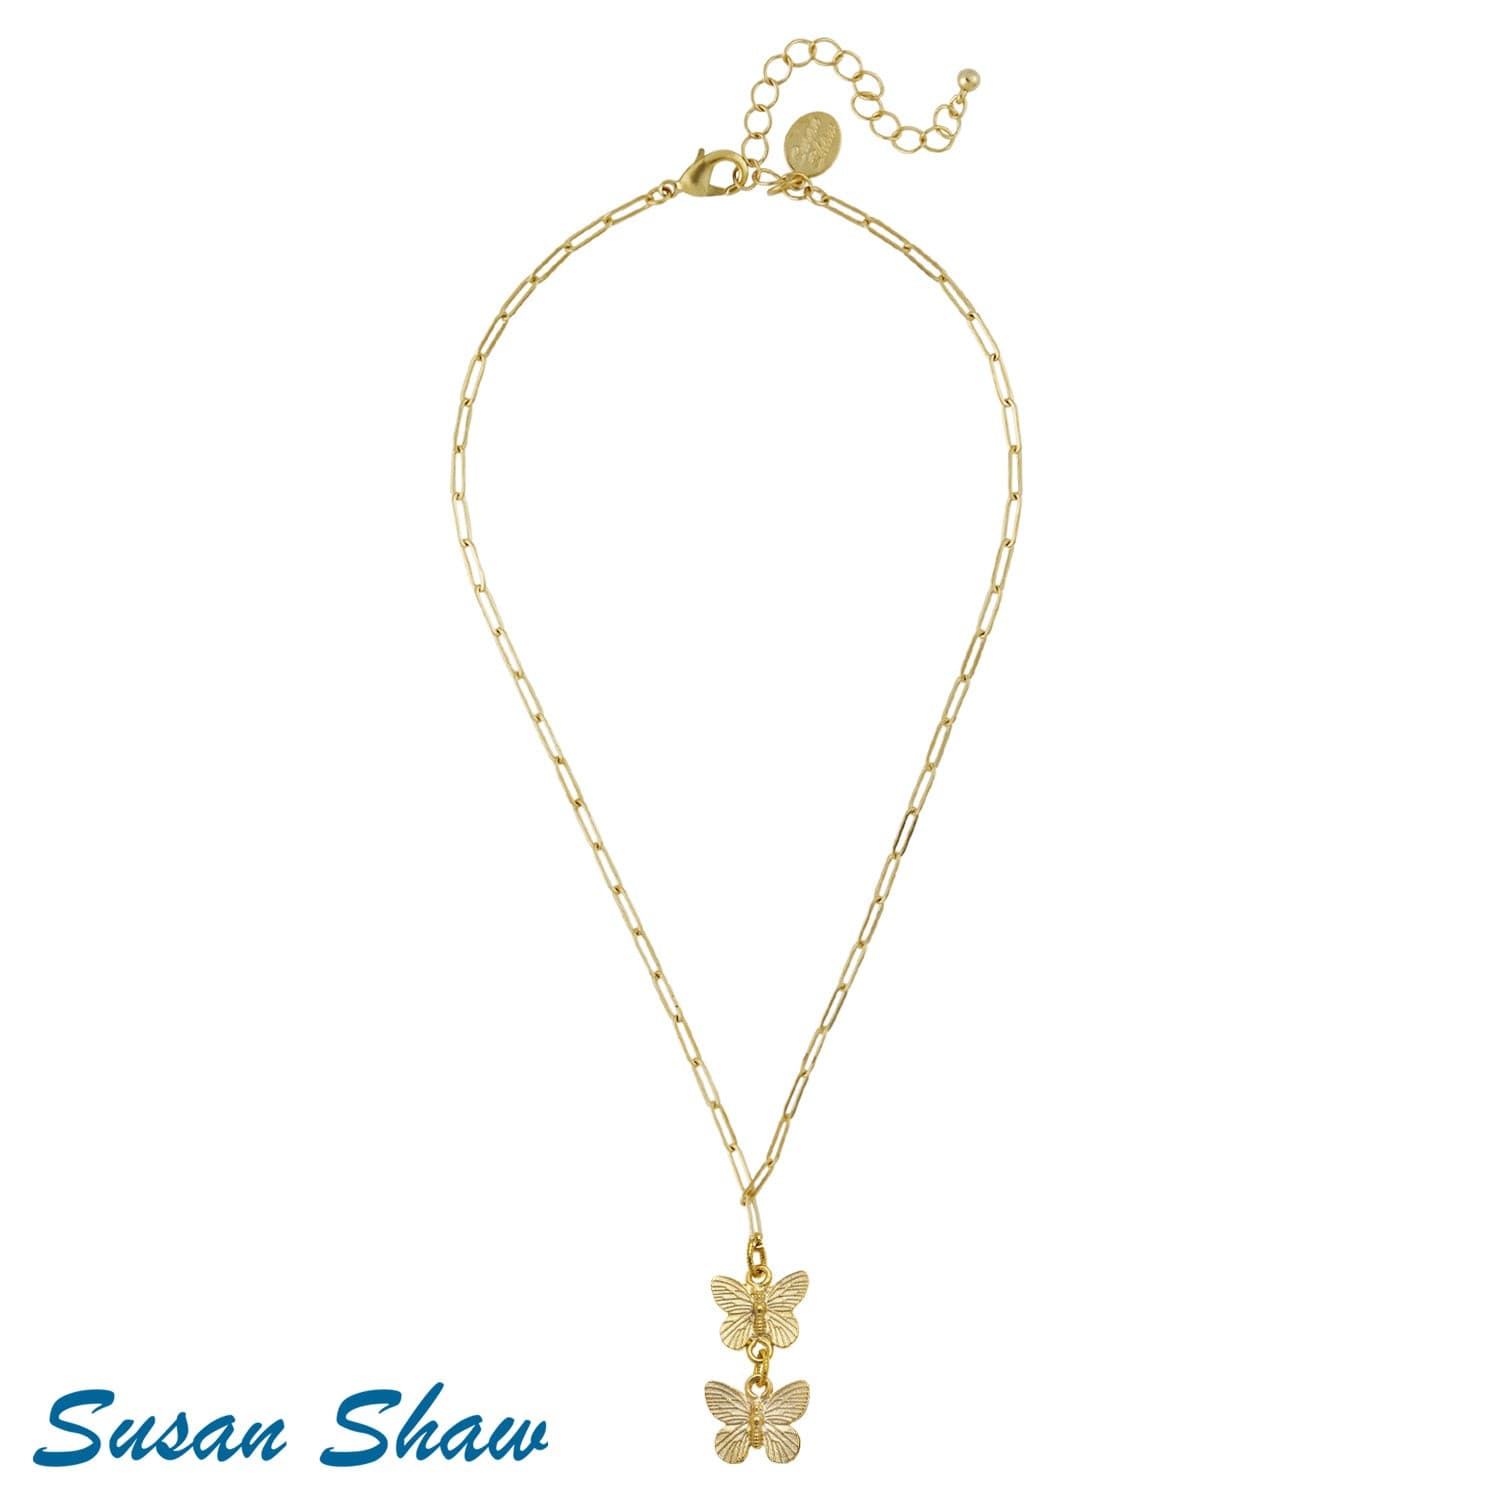 Susan Shaw Hannah Butterfly Necklace.